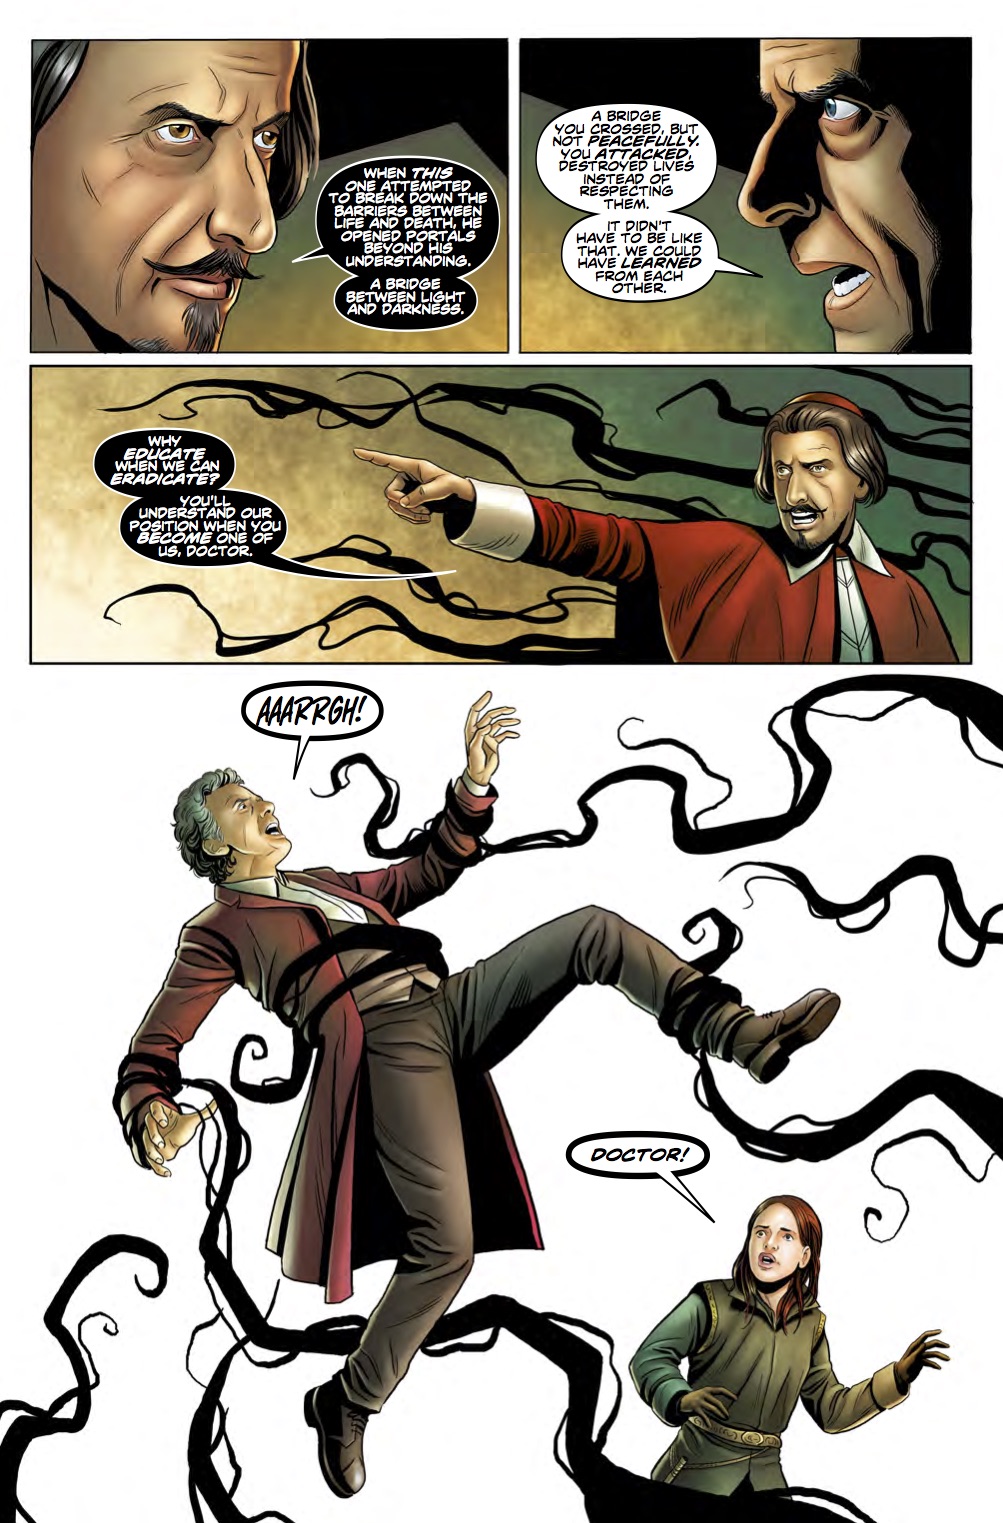 Doctor_Who_The_Twelfth_Doctor_2_13_Preview 3 - NerdSpan